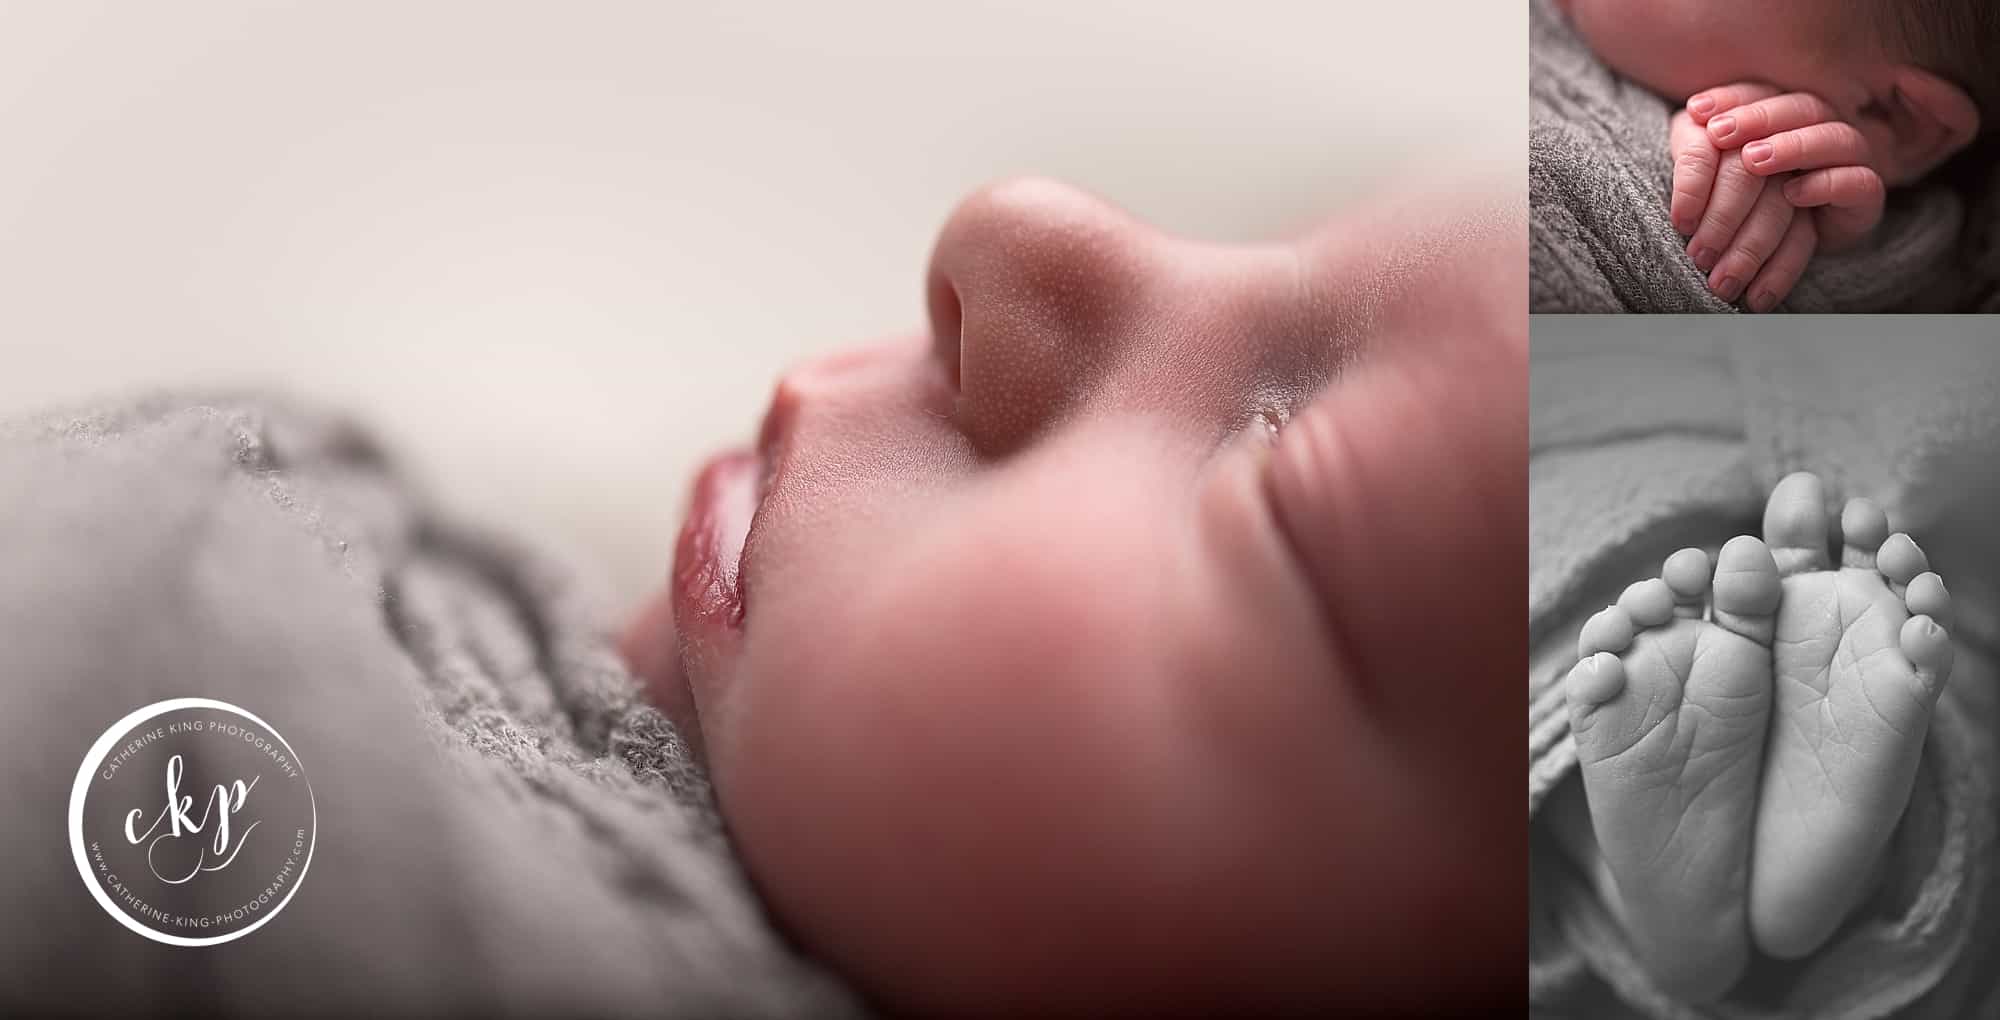 Newborn photography session with catherine king photography a newborn photographer in ct | Lennox